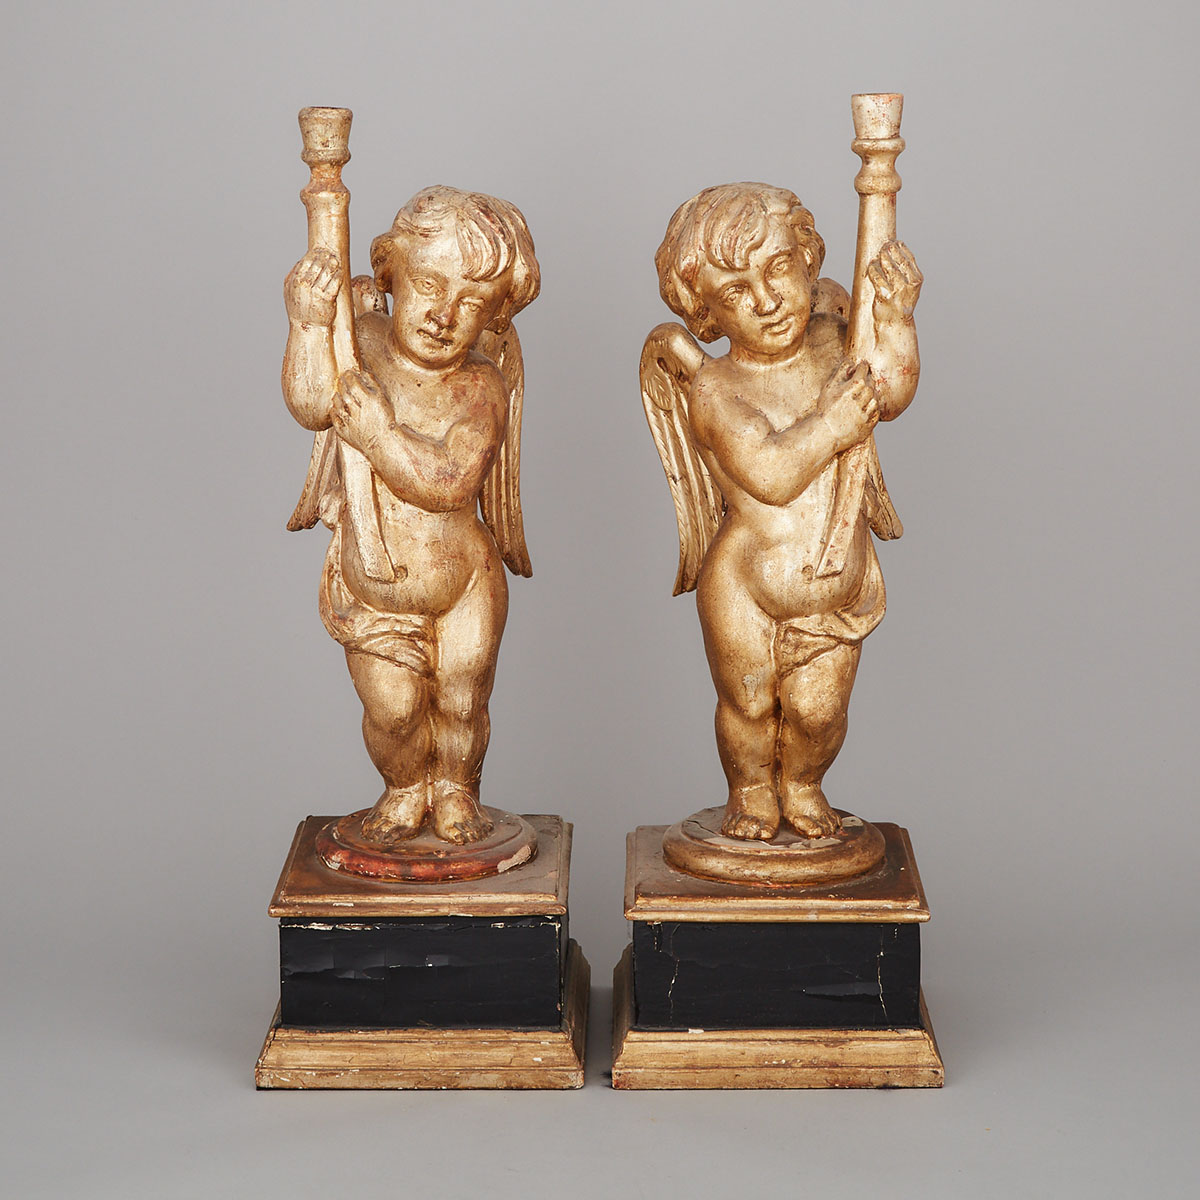 Pair of Italian Carved and Silver Gilt Cherub Form Table Lamps, early/mid 20th century